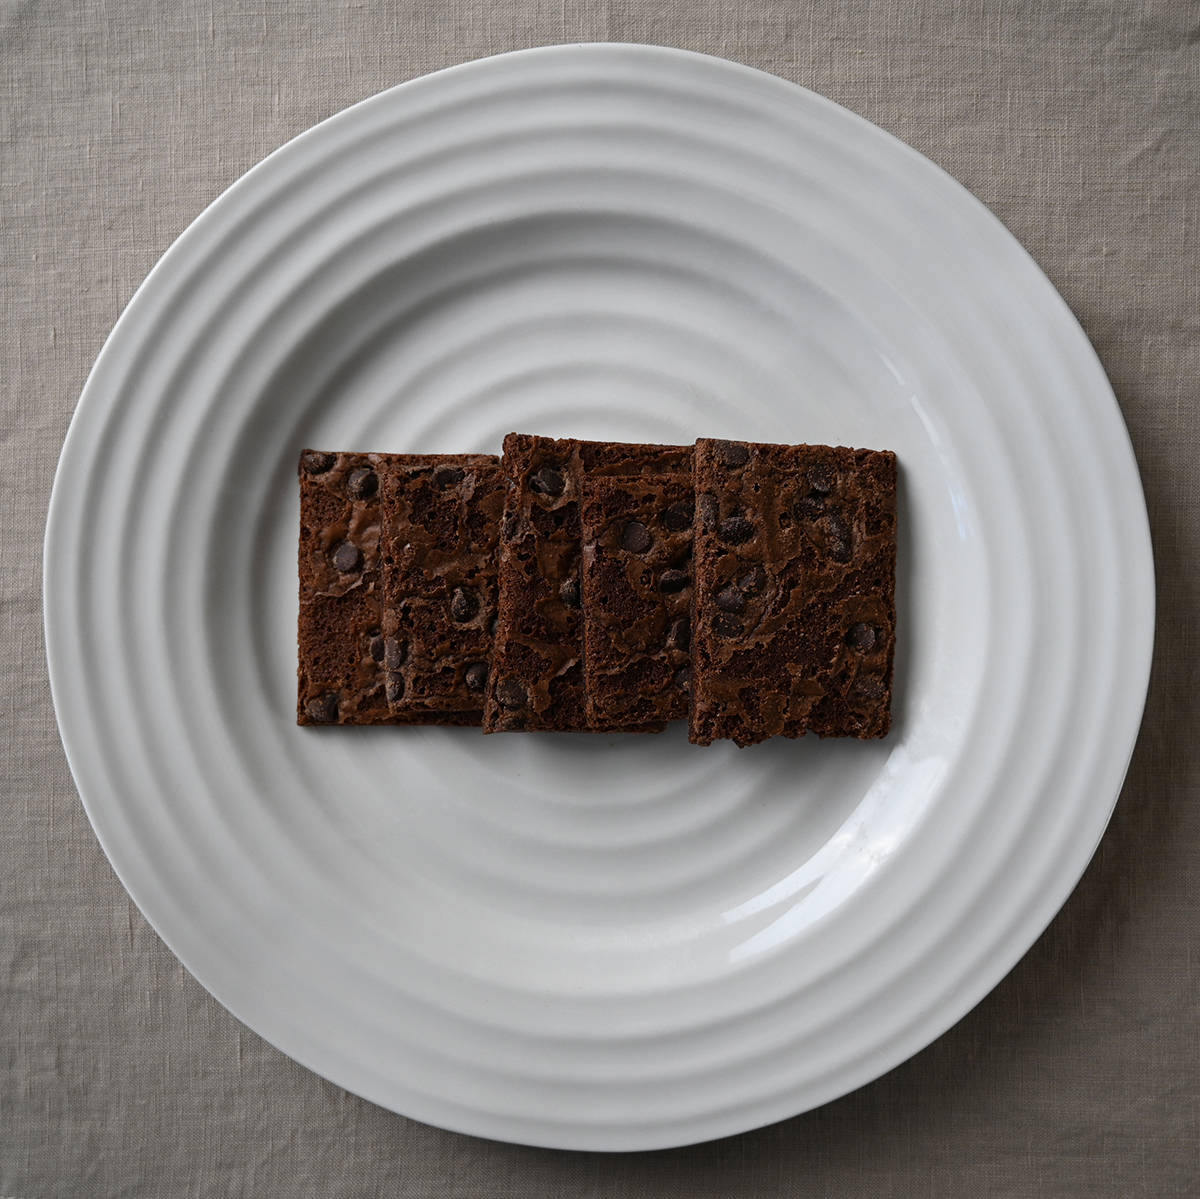 Image of five brownie brittle pieces served on a white plate.